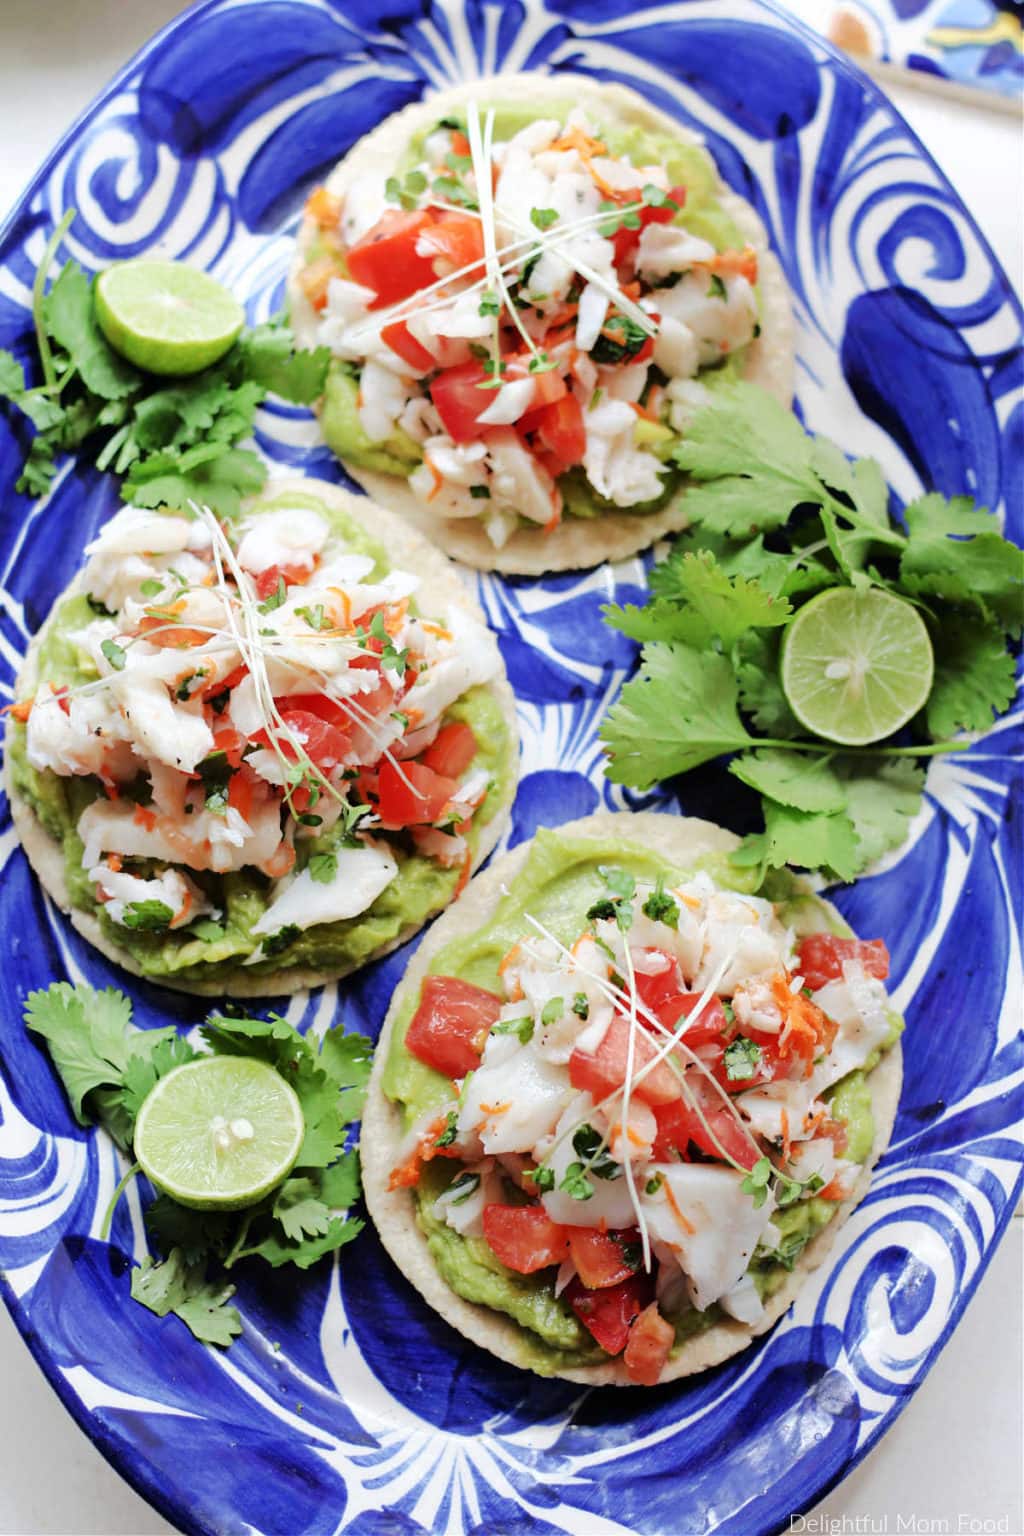 Best Ceviche Recipe In 30 Minutes - Delightful Mom Food